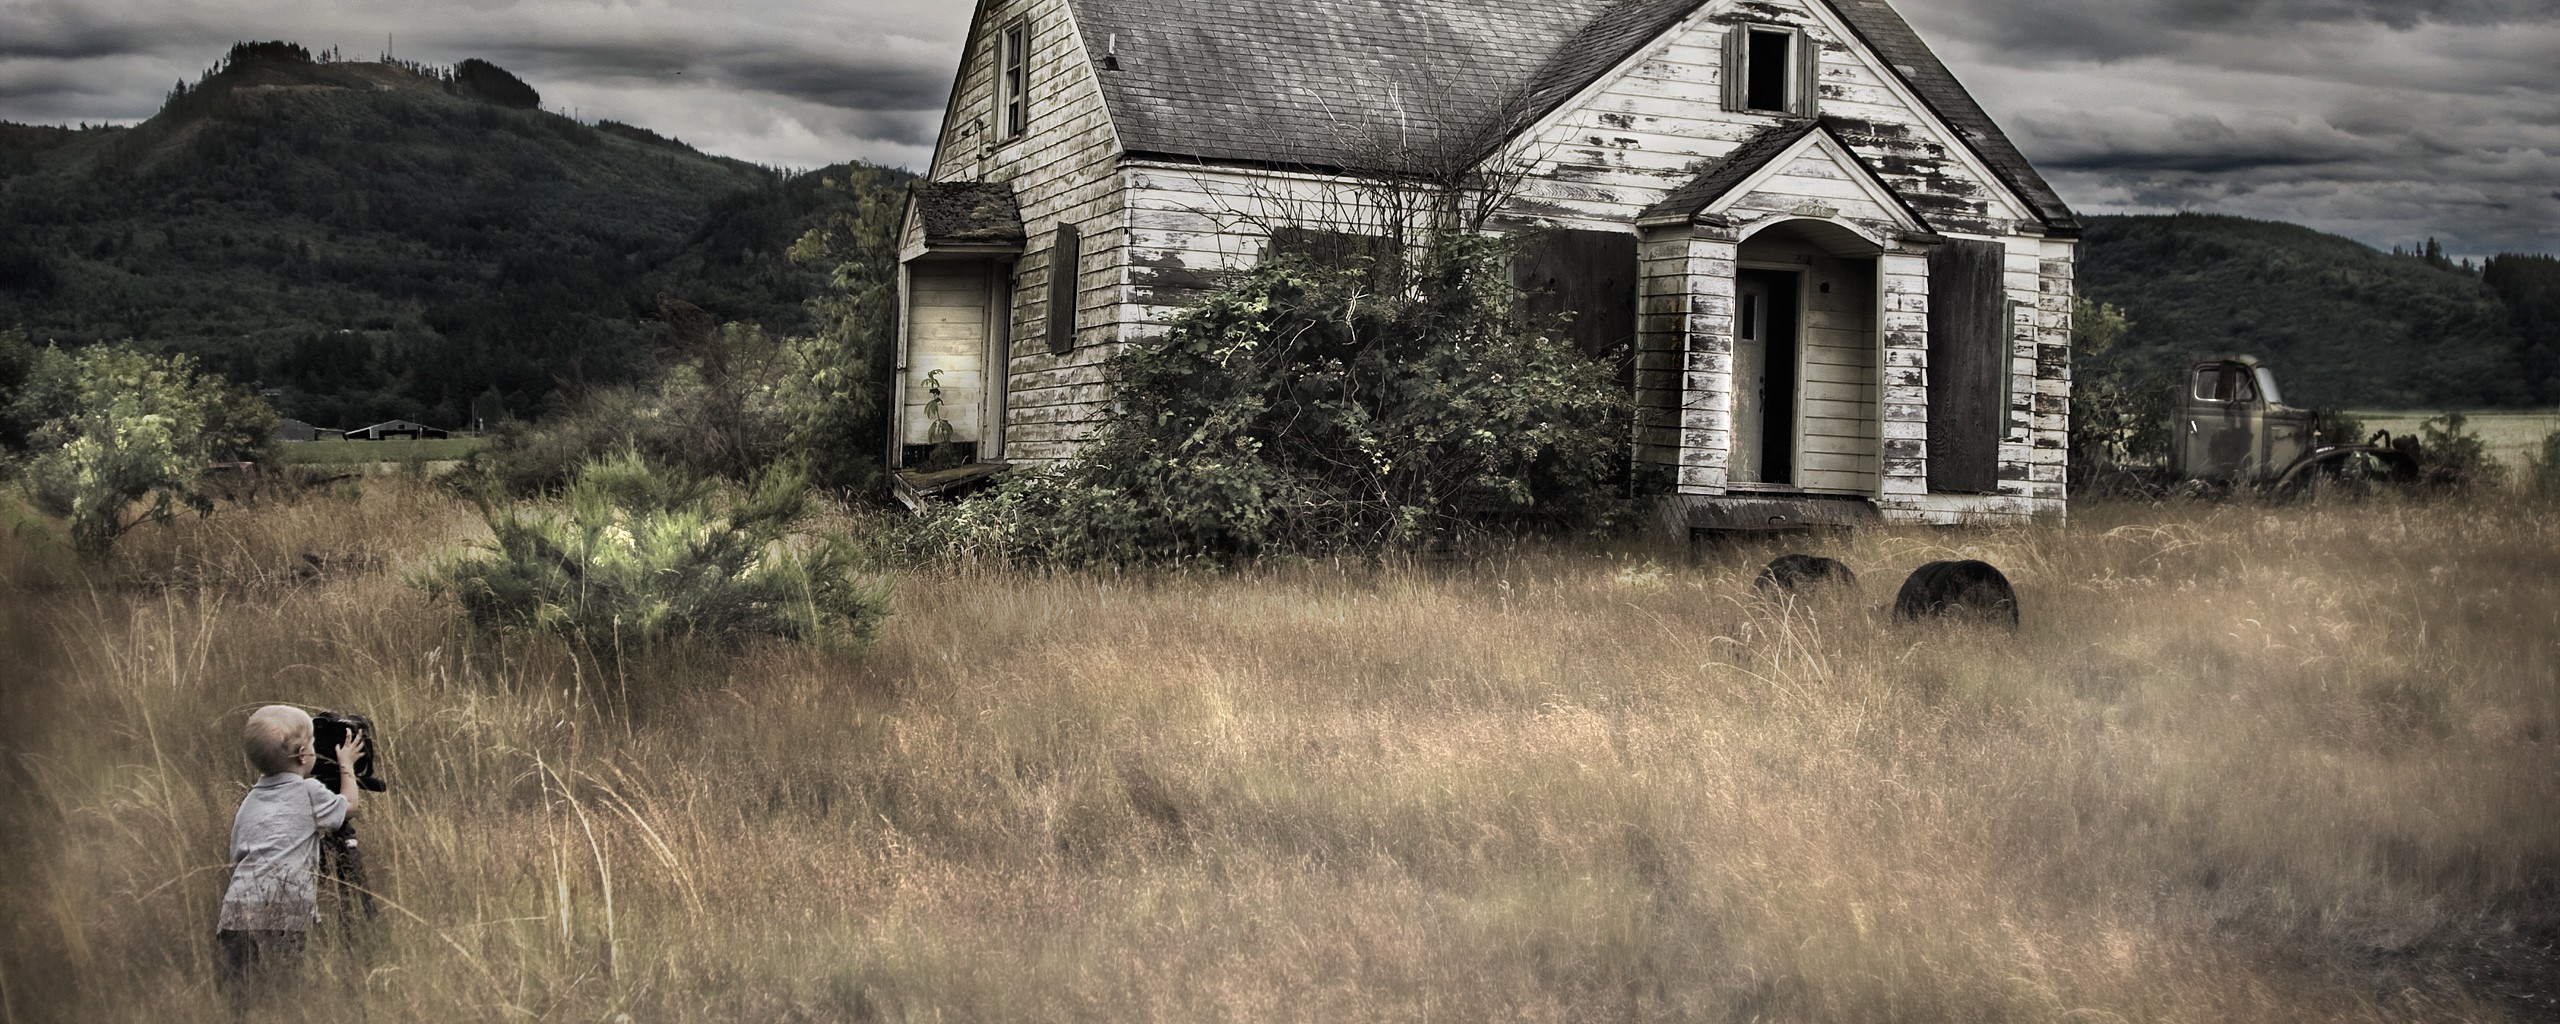 old, houses, photographers, HDR photography, photo manipulation ...